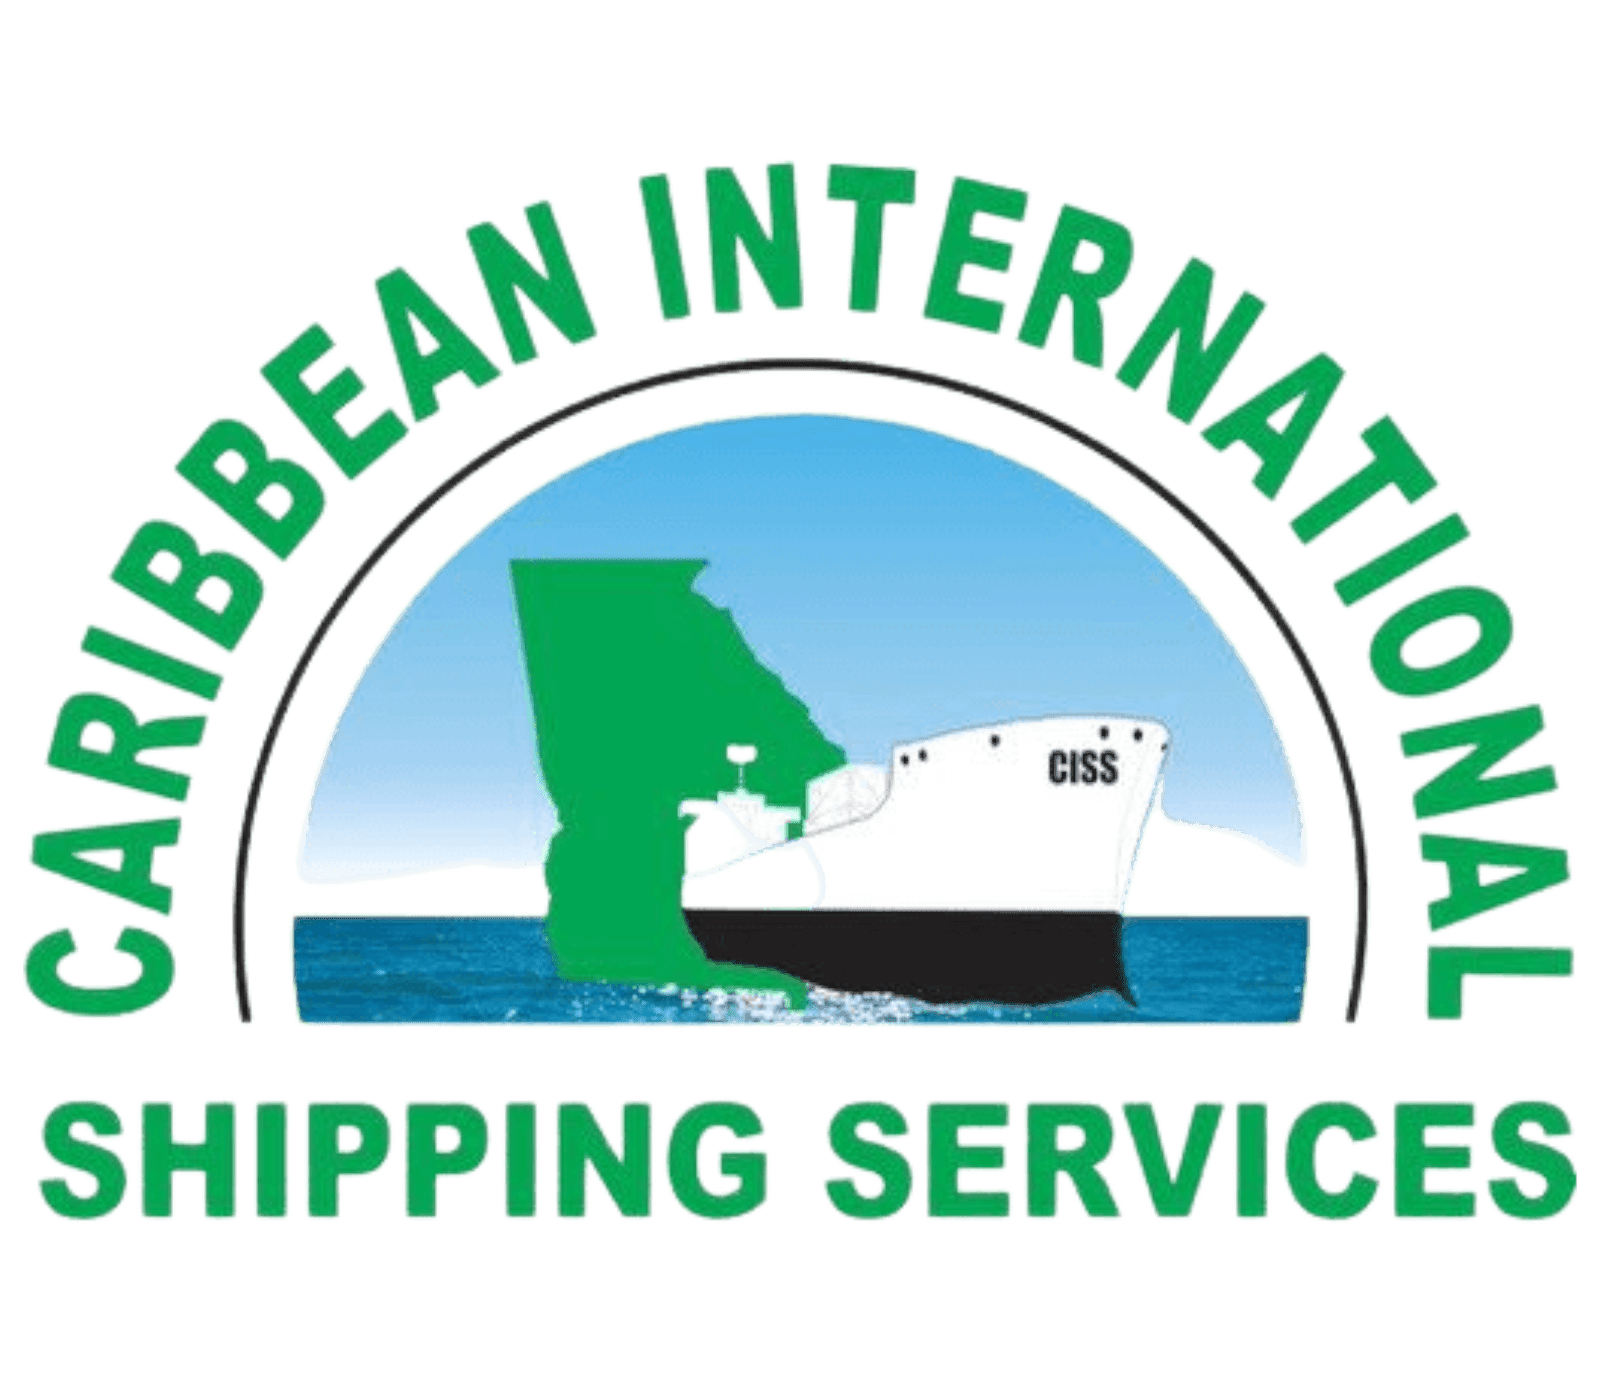 Caribbean Intl Shipping Services